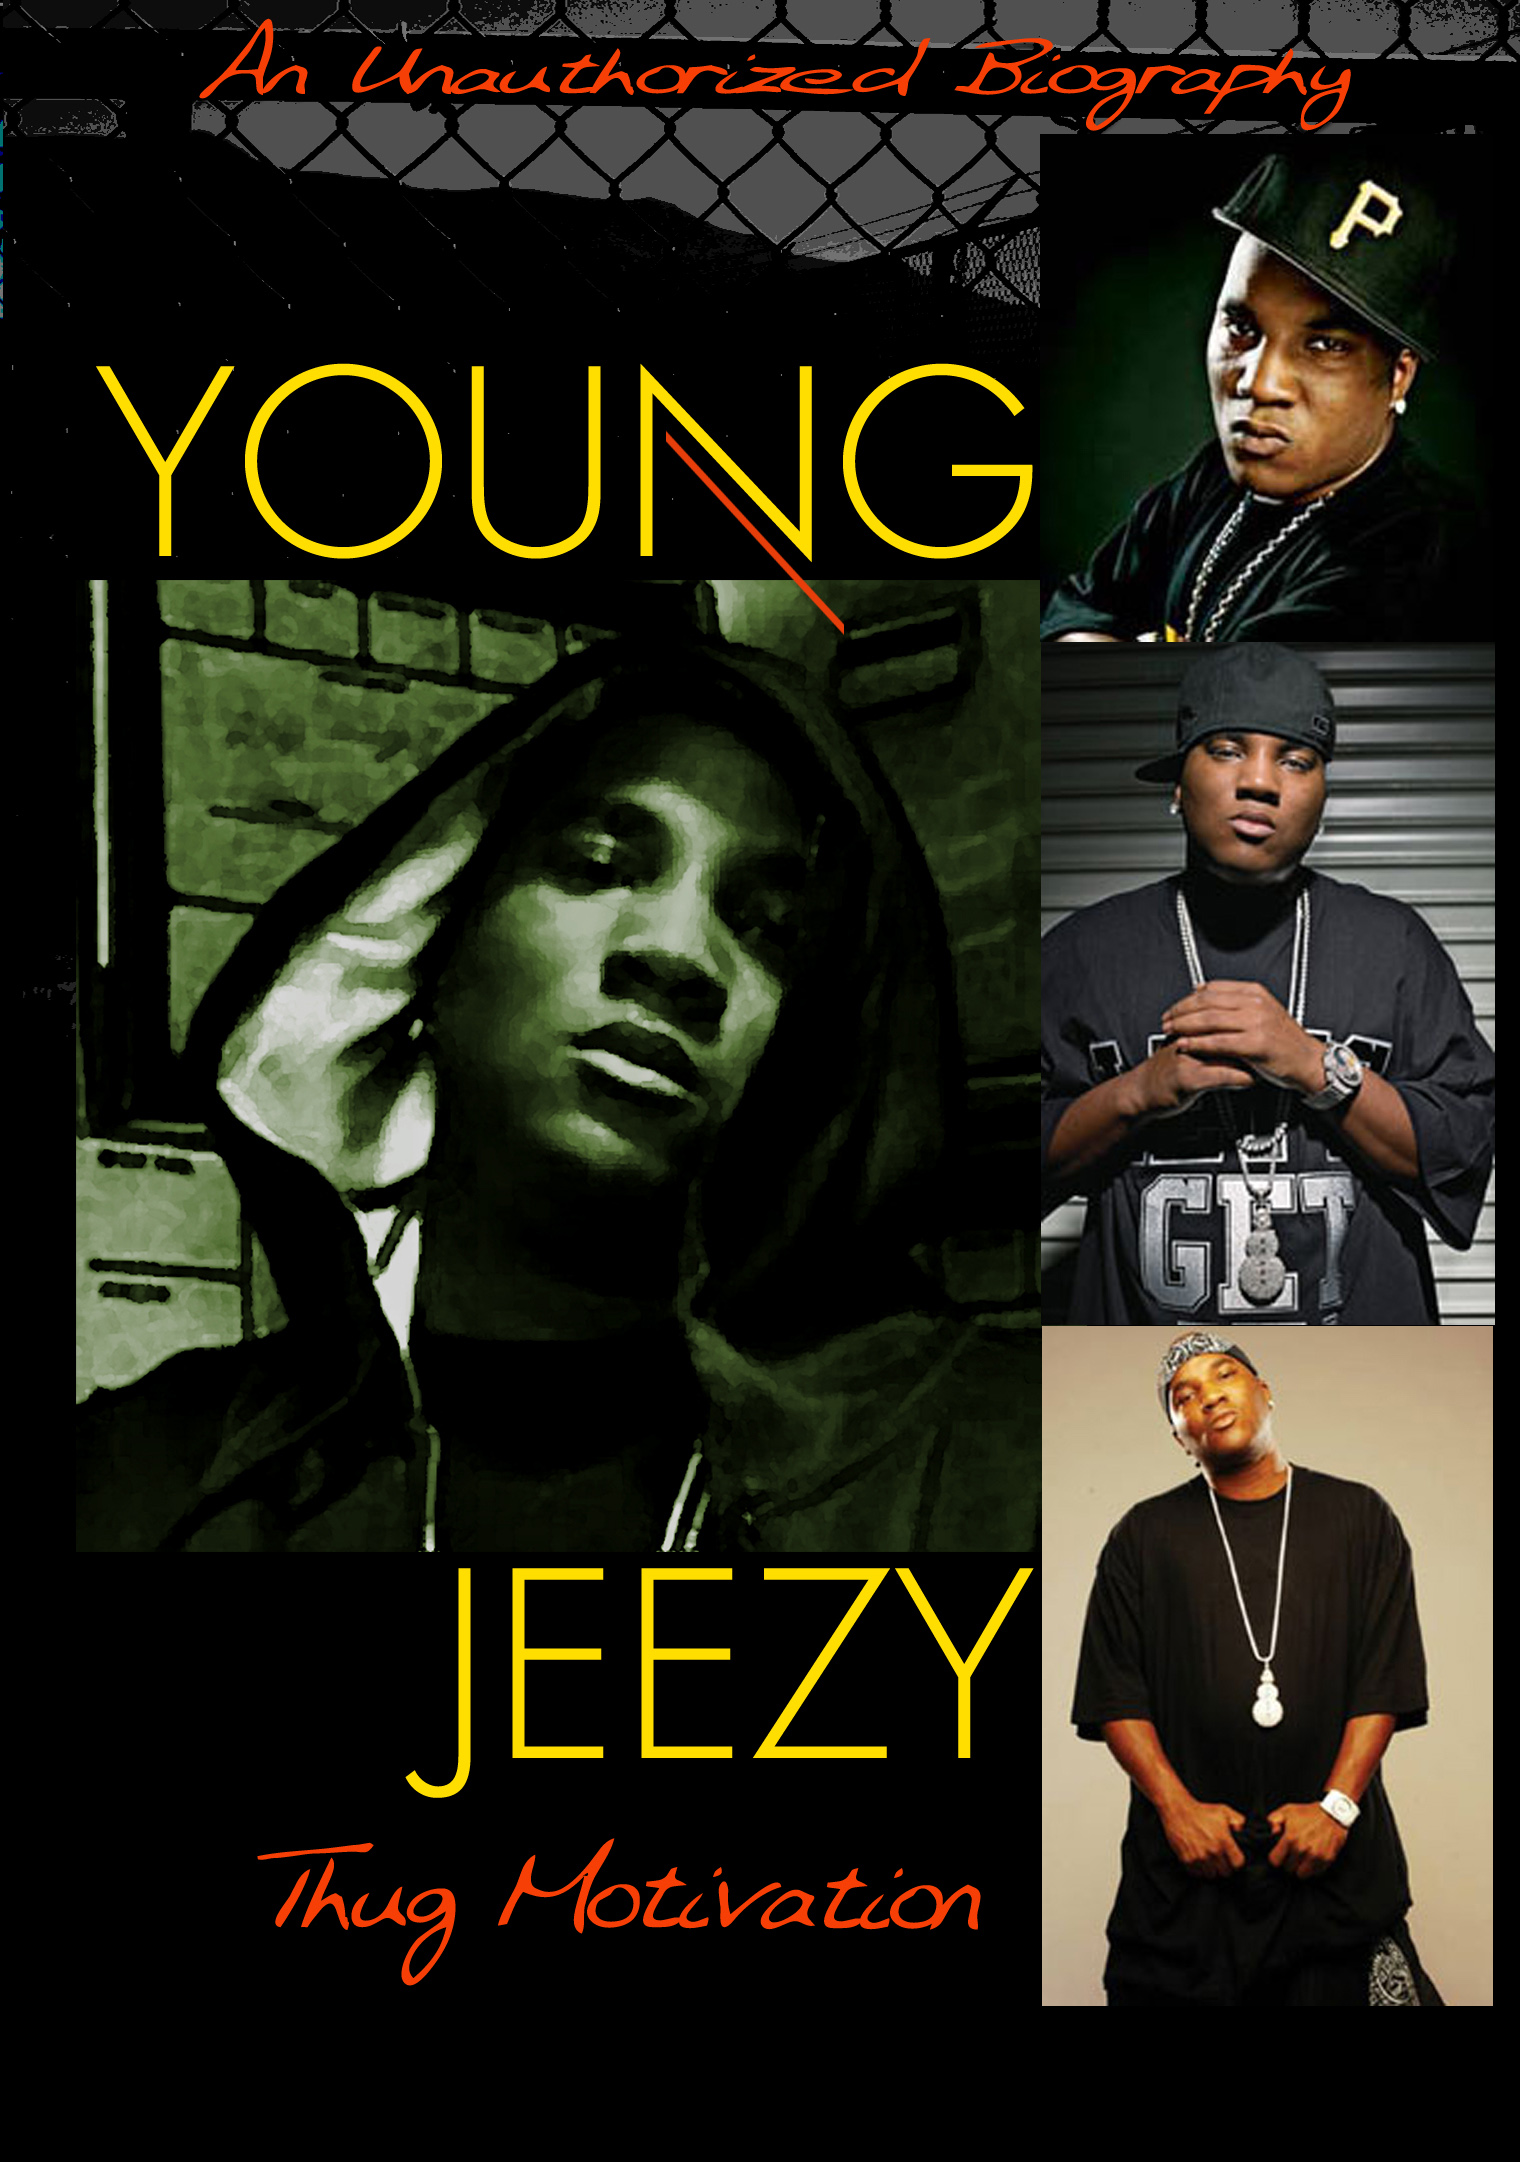 young jeezy thug motivation 101 street verion